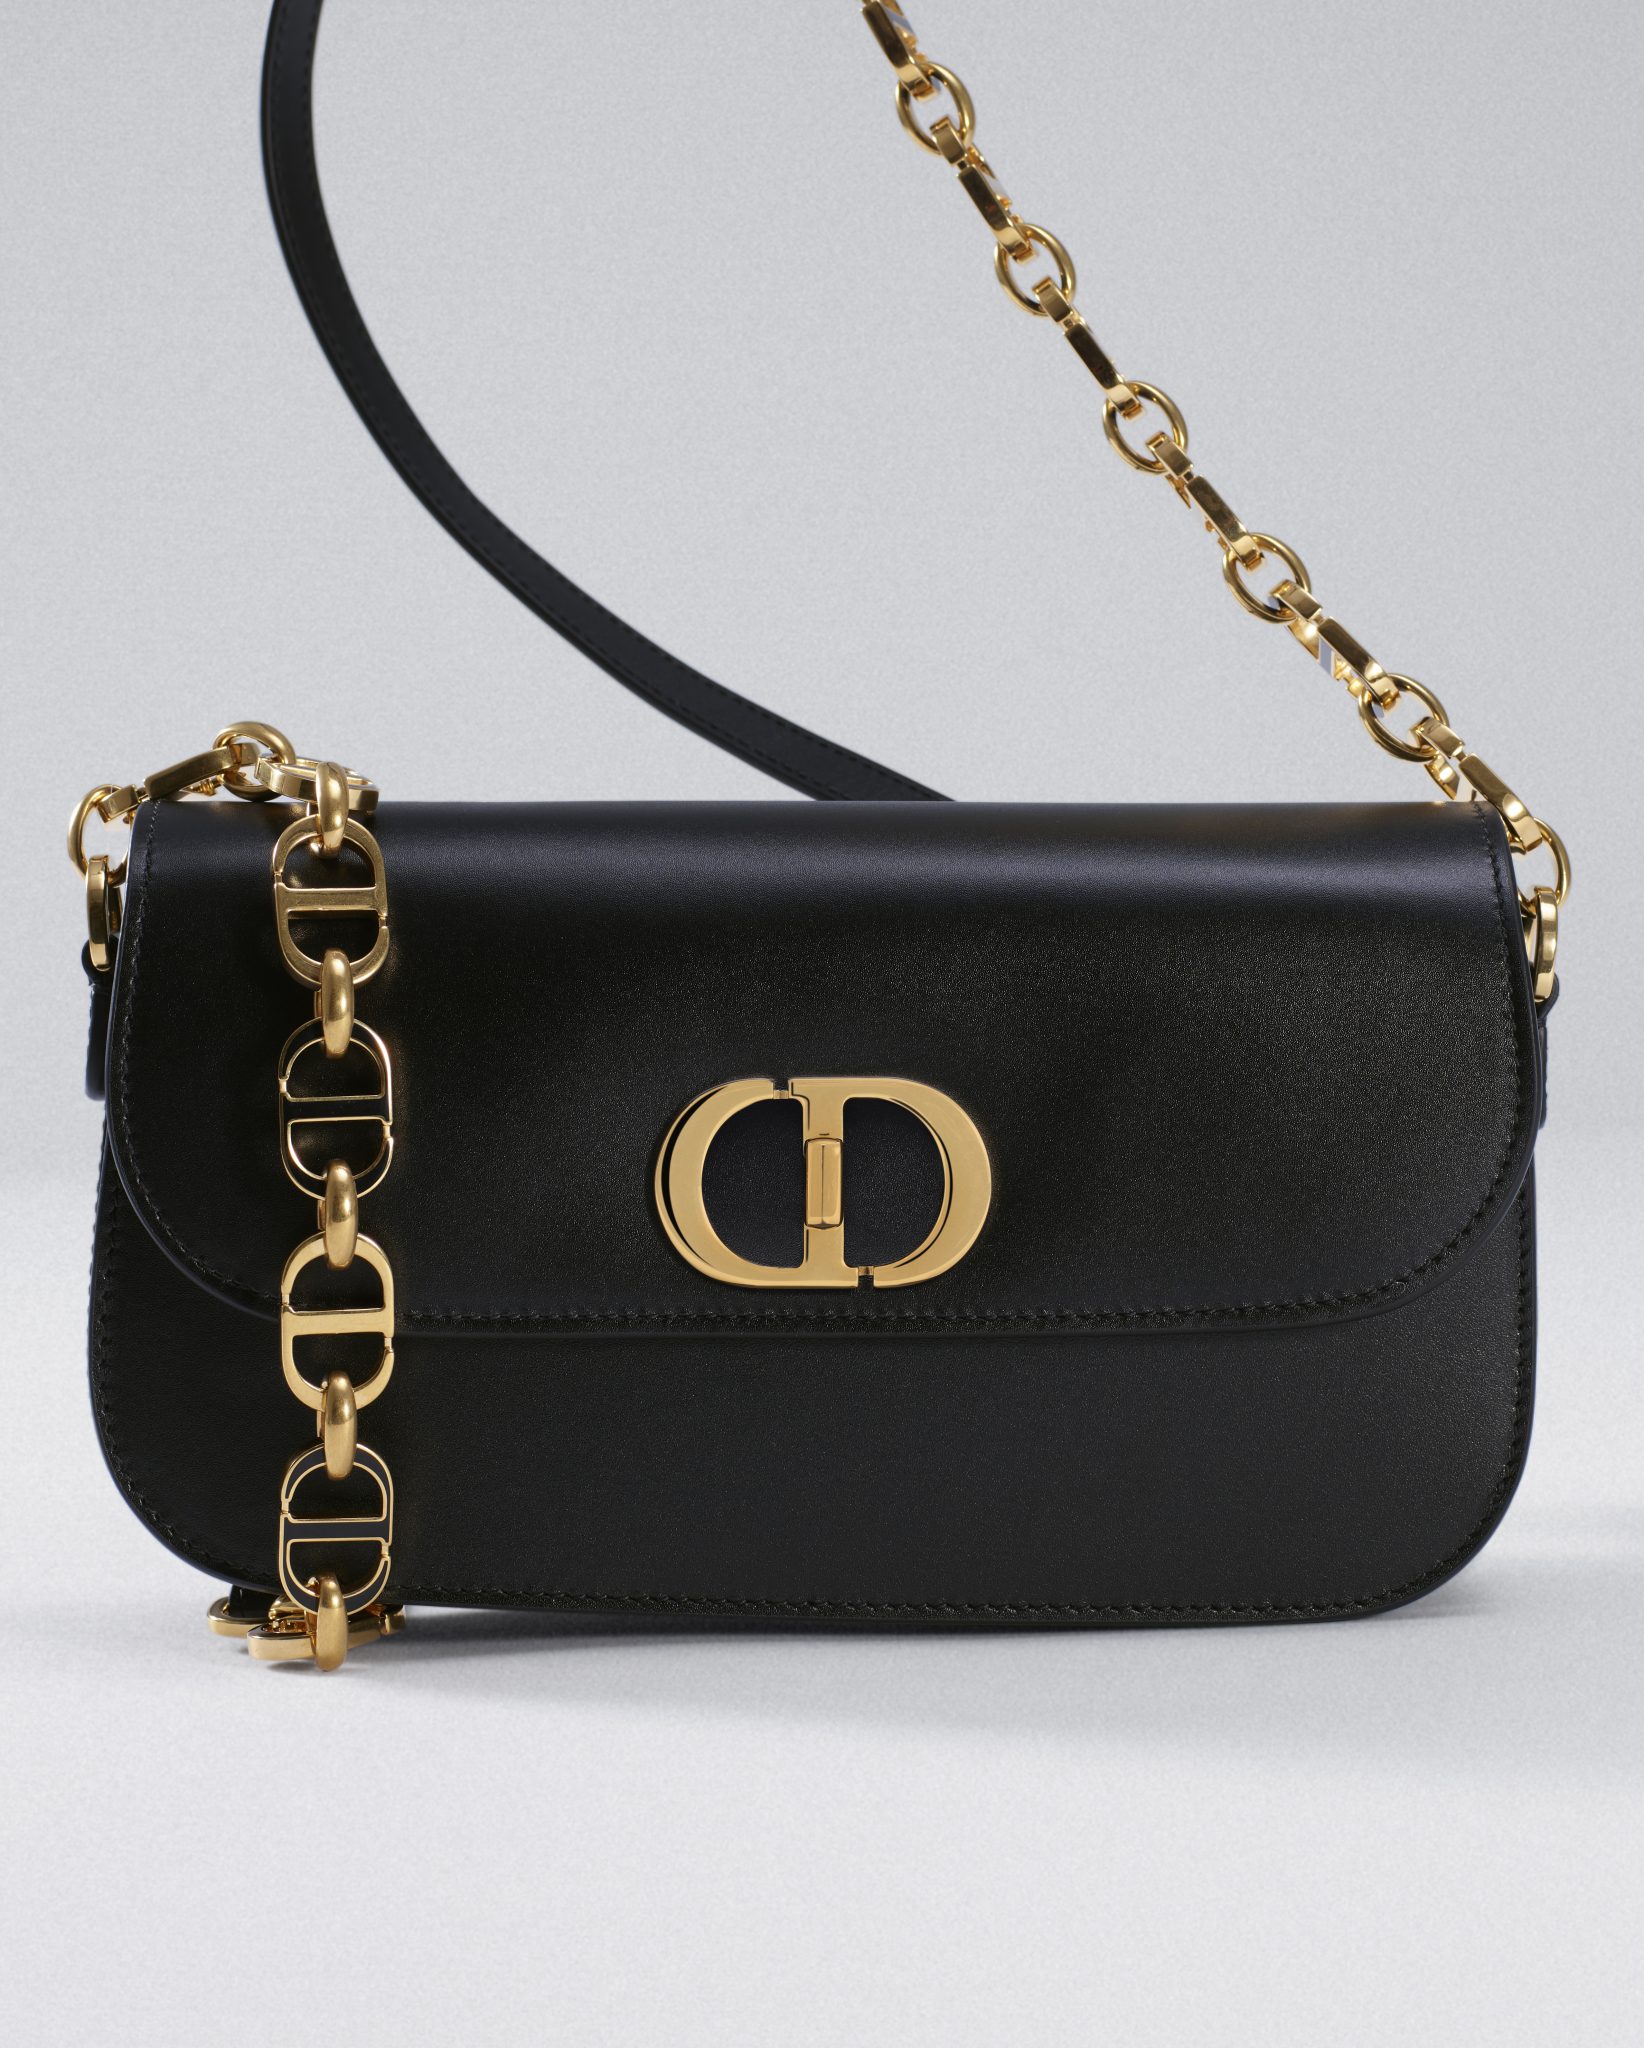 Dior 30 Montaigne Avenue Pouch with Flap